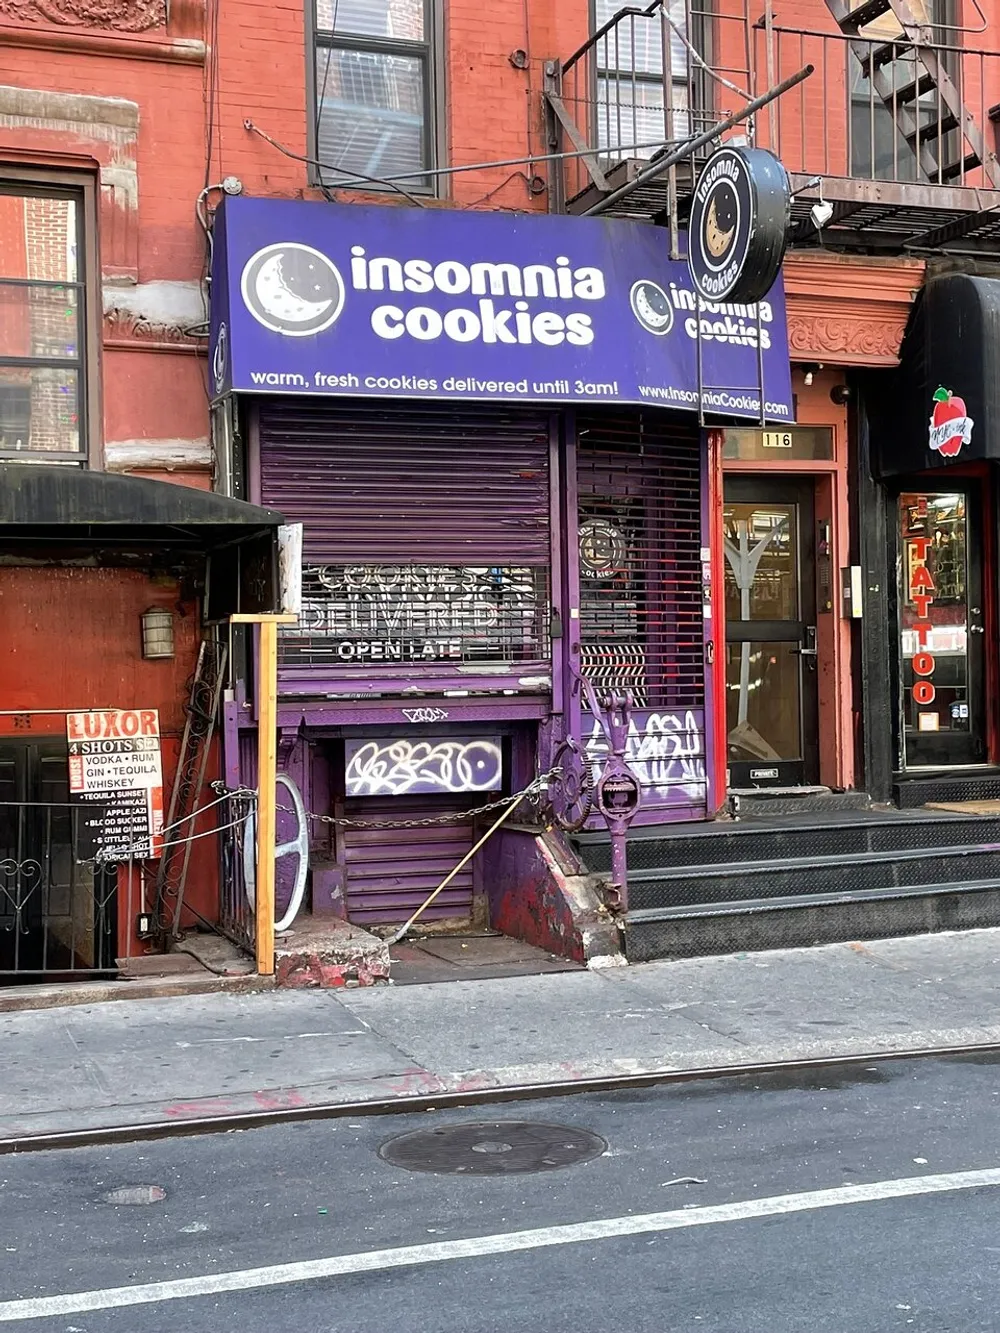 The image shows the storefront of Insomnia Cookies with its distinctive purple awning and signage advertising warm fresh cookies delivered until 3 am